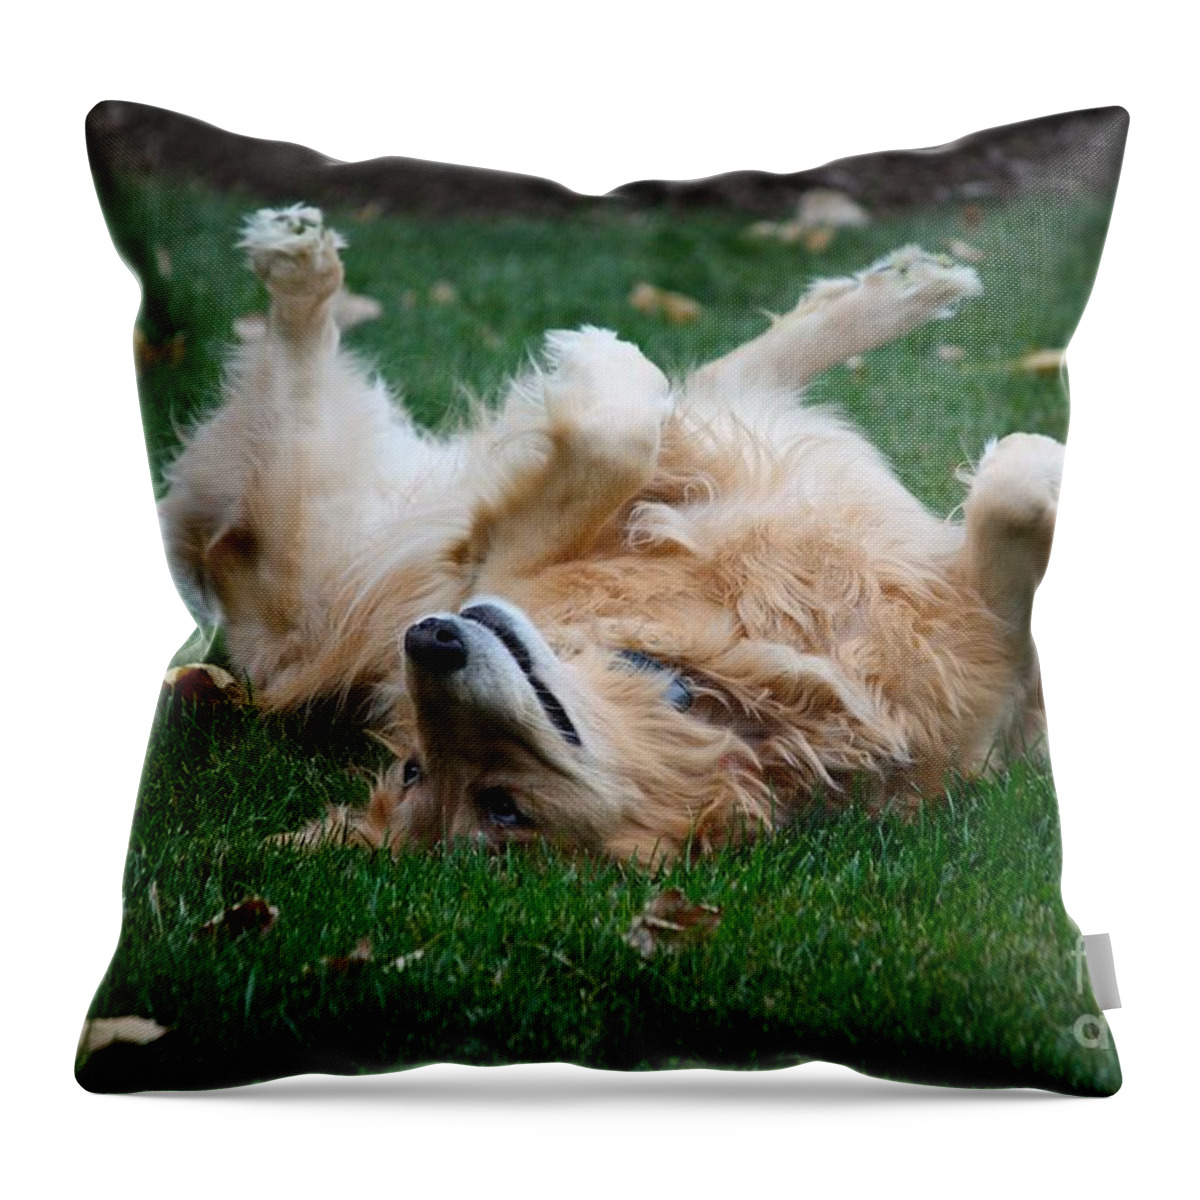 Dog Throw Pillow featuring the photograph To Be A Dog by Veronica Batterson